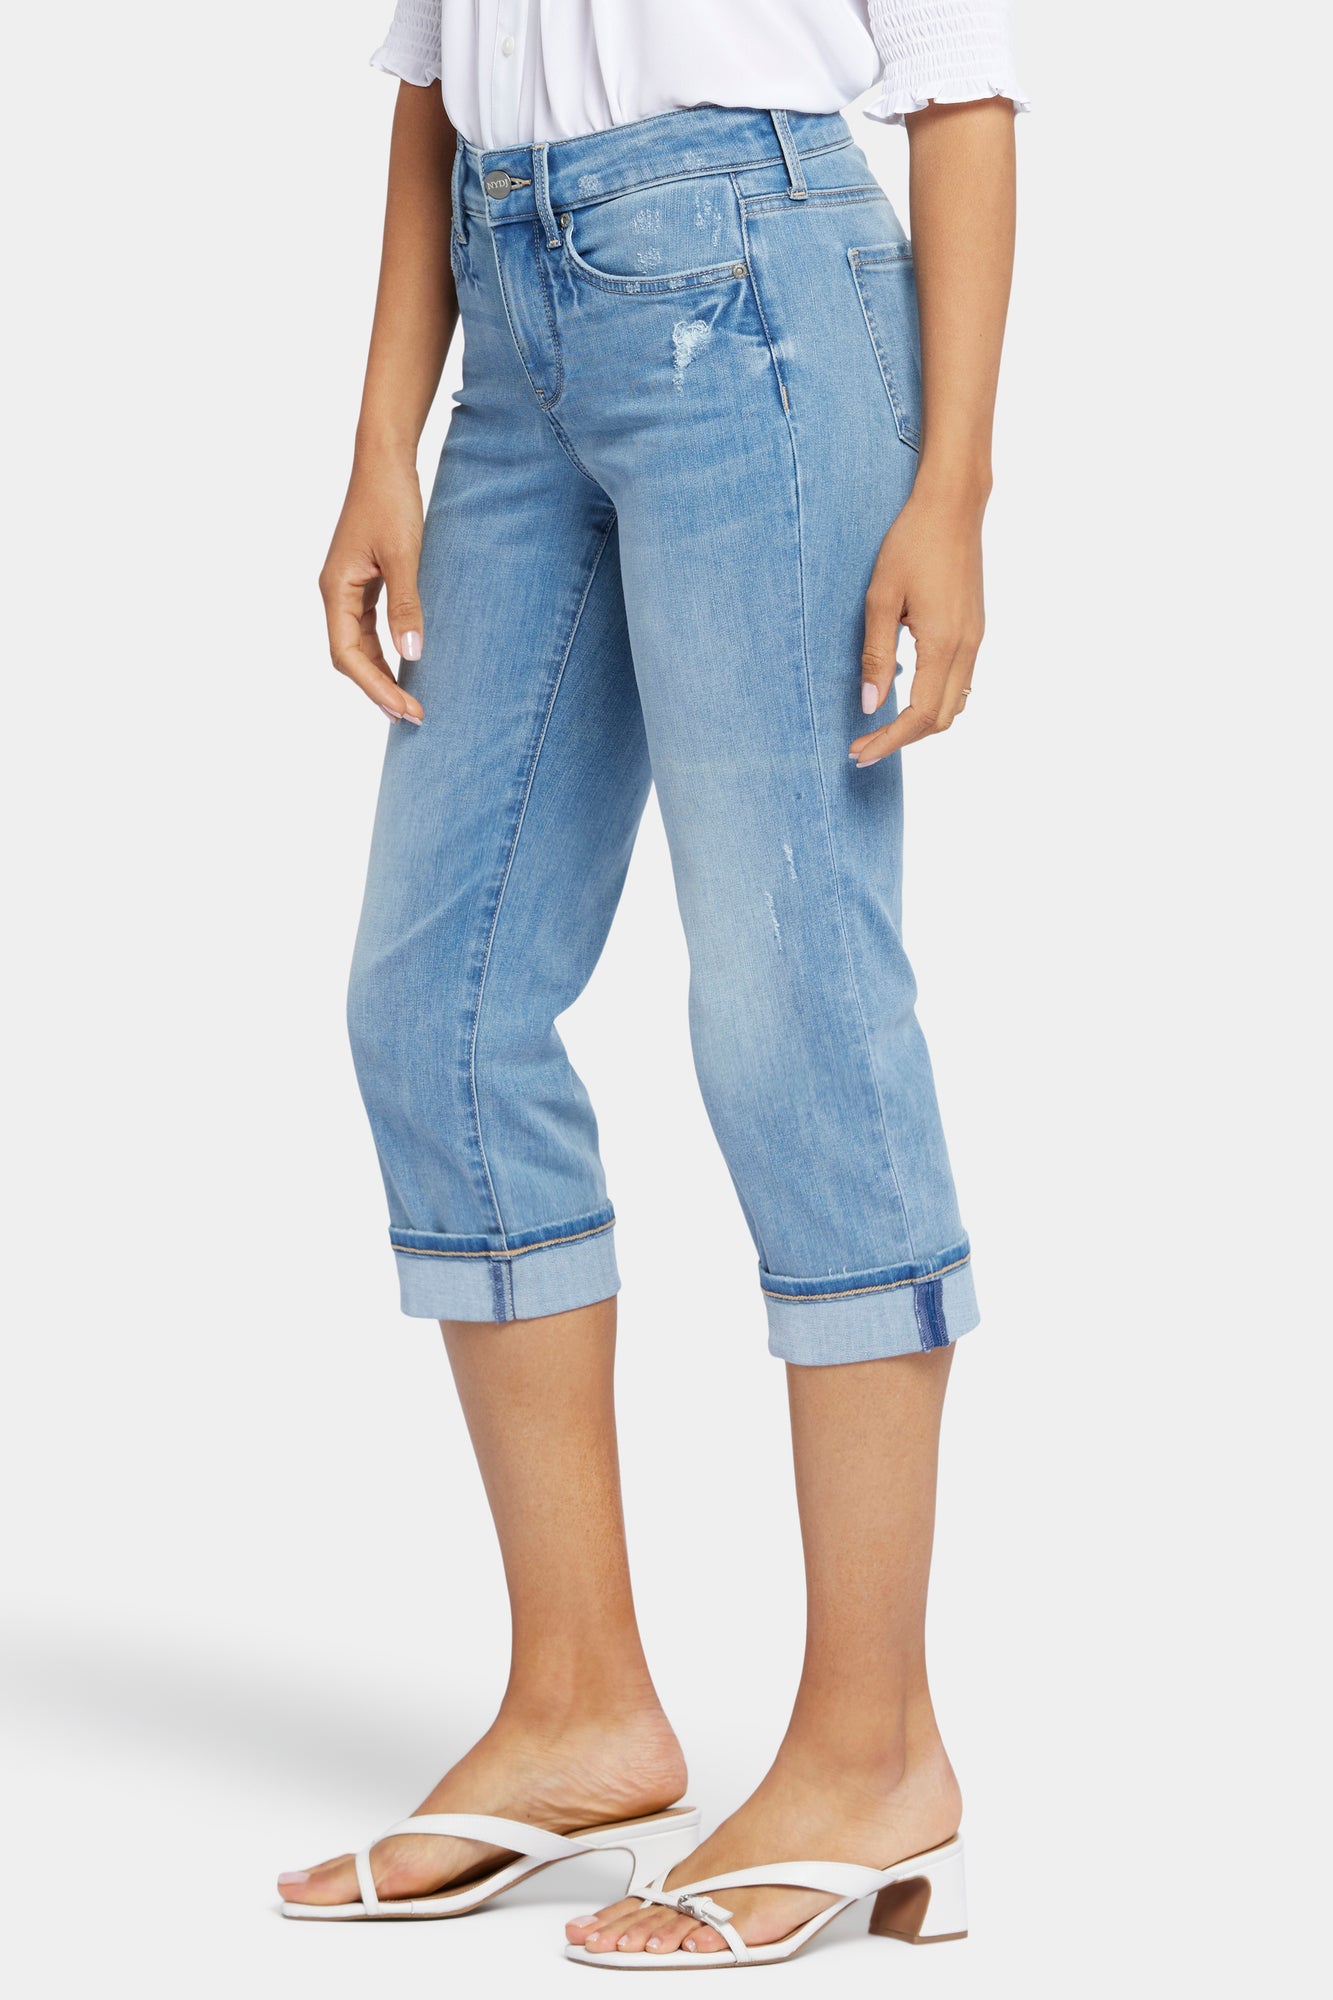 NYDJ Marilyn Straight Crop Jeans In Cool Embrace® Denim With Cuffs - Lakefront